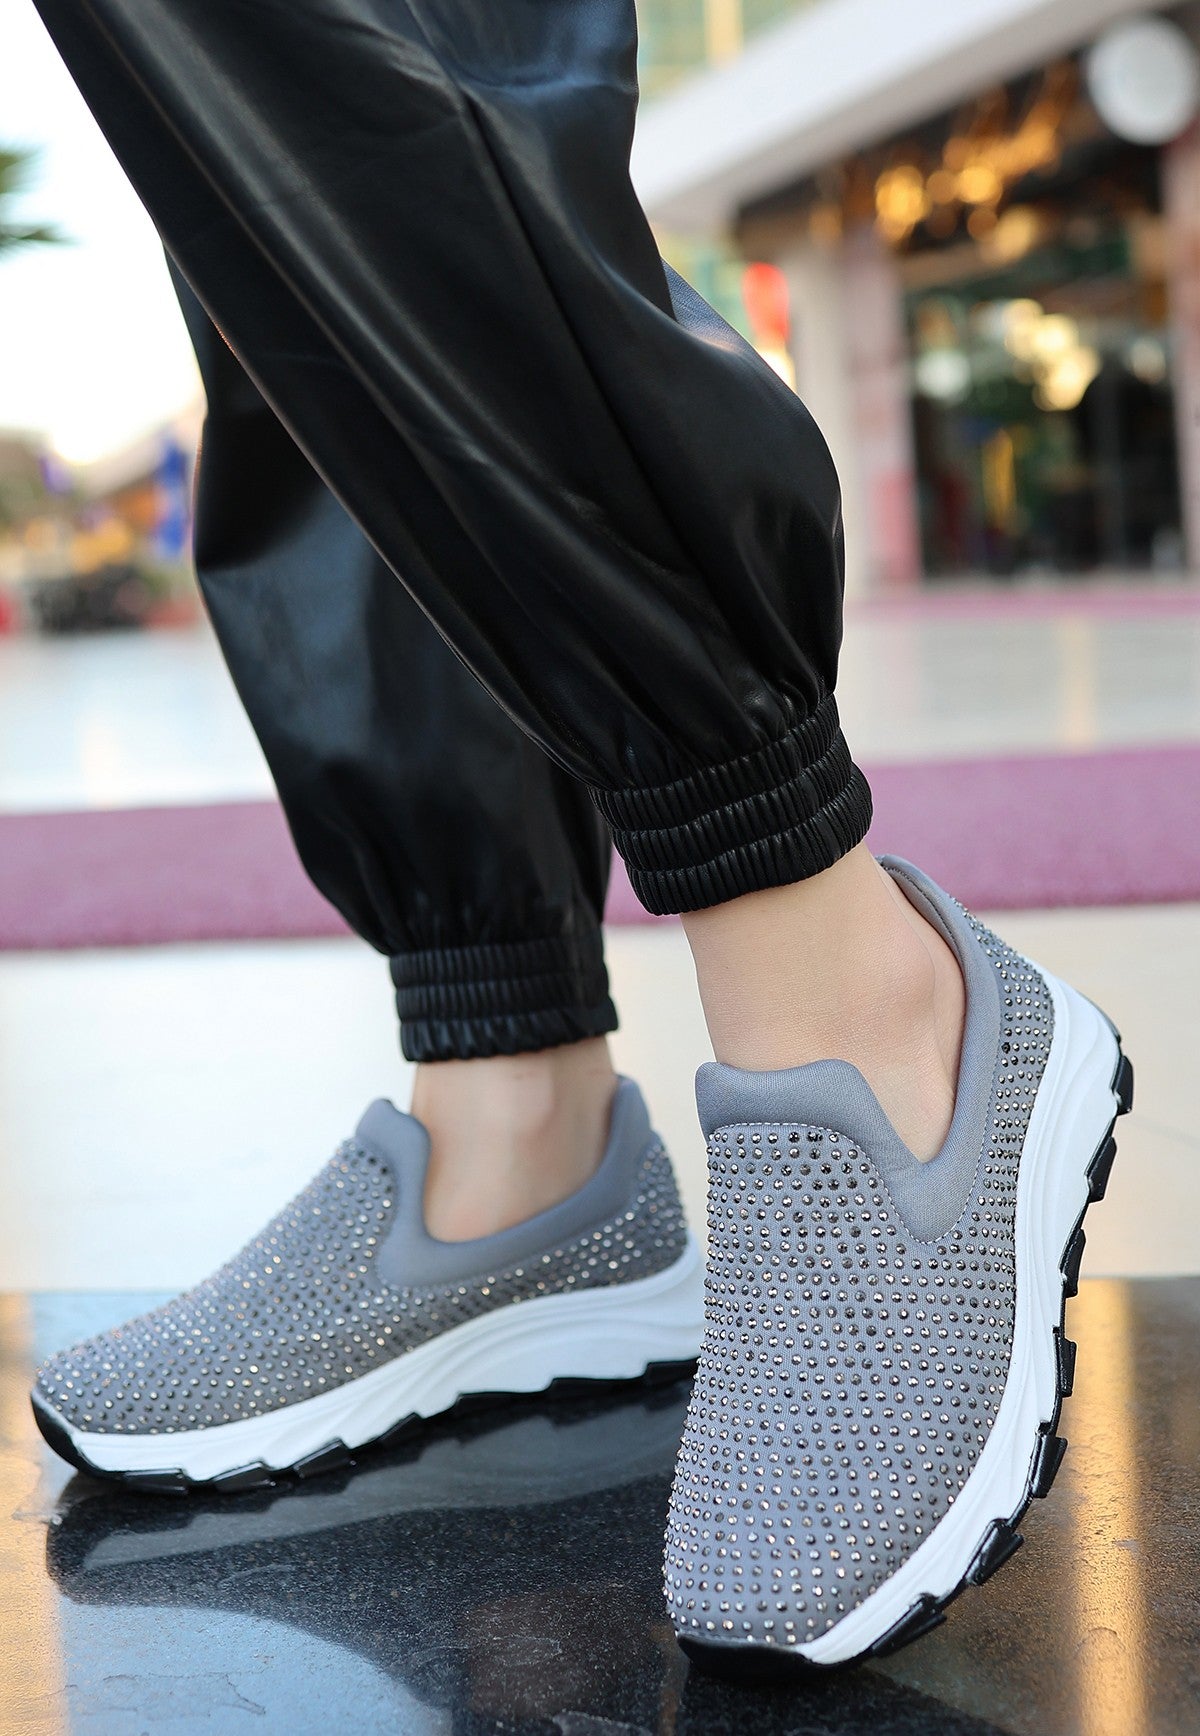 Women's Mıry Gray Stretch Sports Shoes - STREETMODE ™